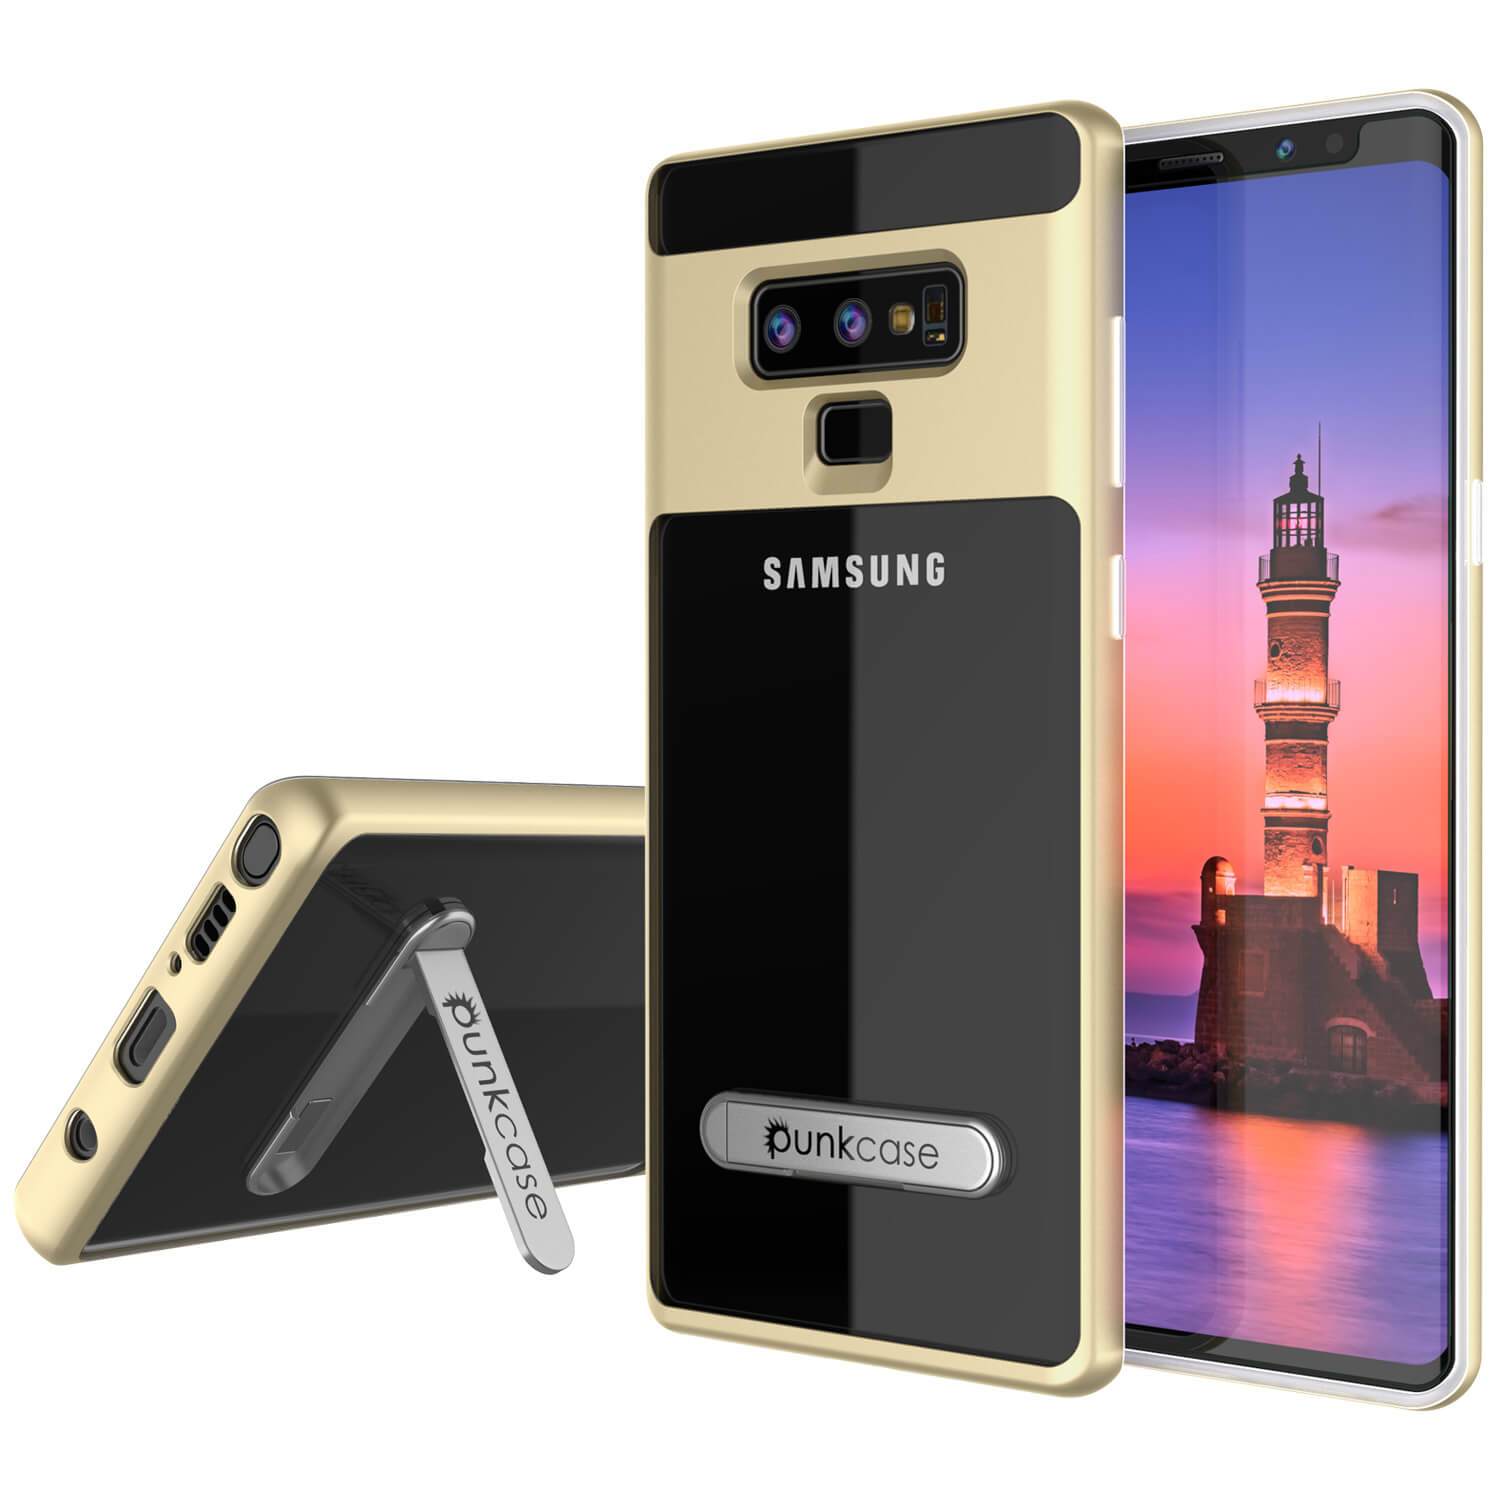 Galaxy Note 9 Lucid 3.0 PunkCase Armor Cover w/Integrated Kickstand and Screen Protector [Gold] - PunkCase NZ